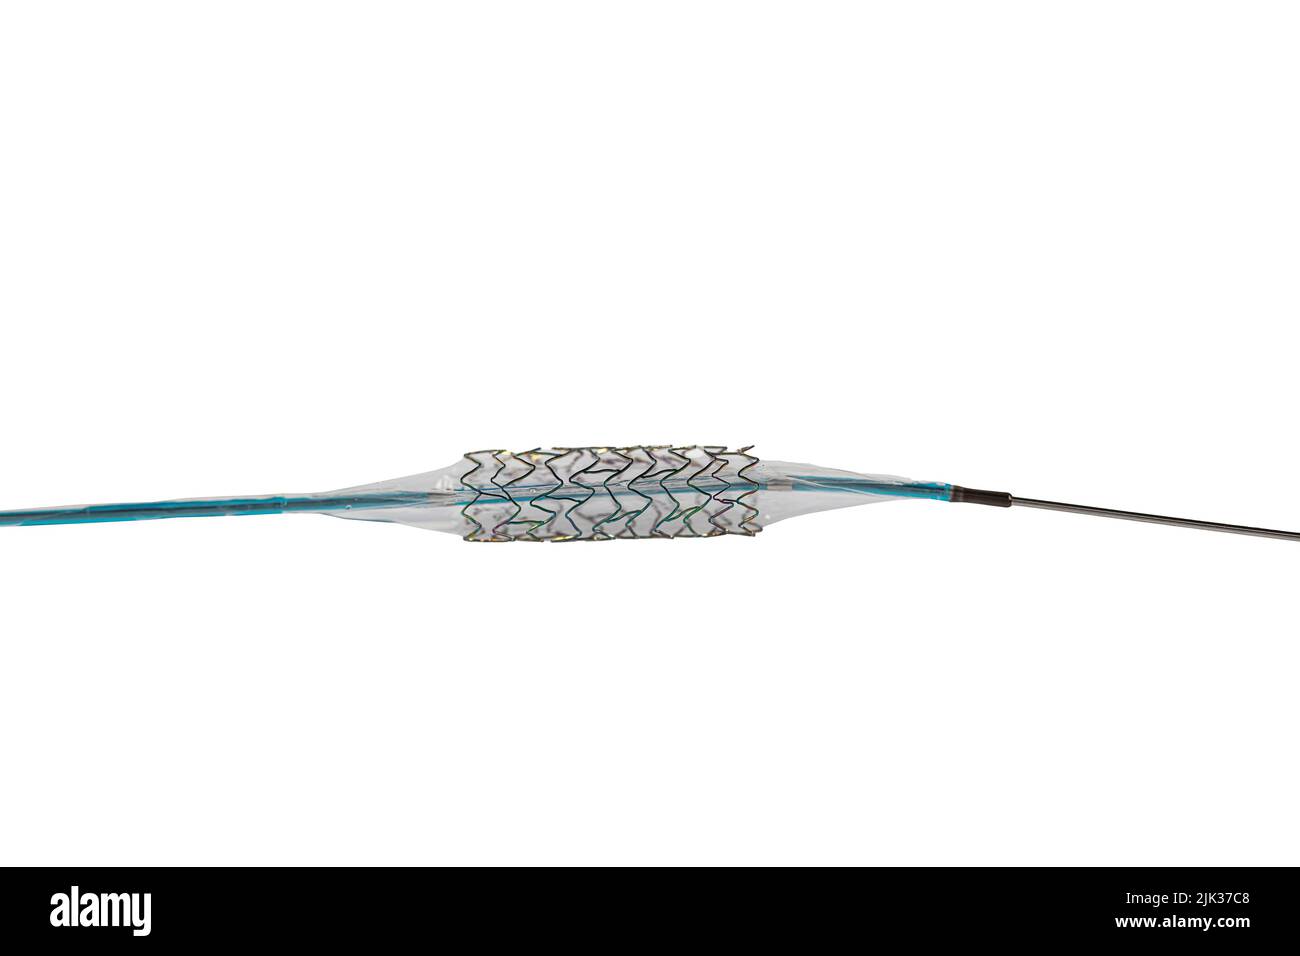 Heart Stent angioplasty. Stent and catheter for implantation into blood vessels with an empty and filled balloon. High resolution photo isolated on a Stock Photo